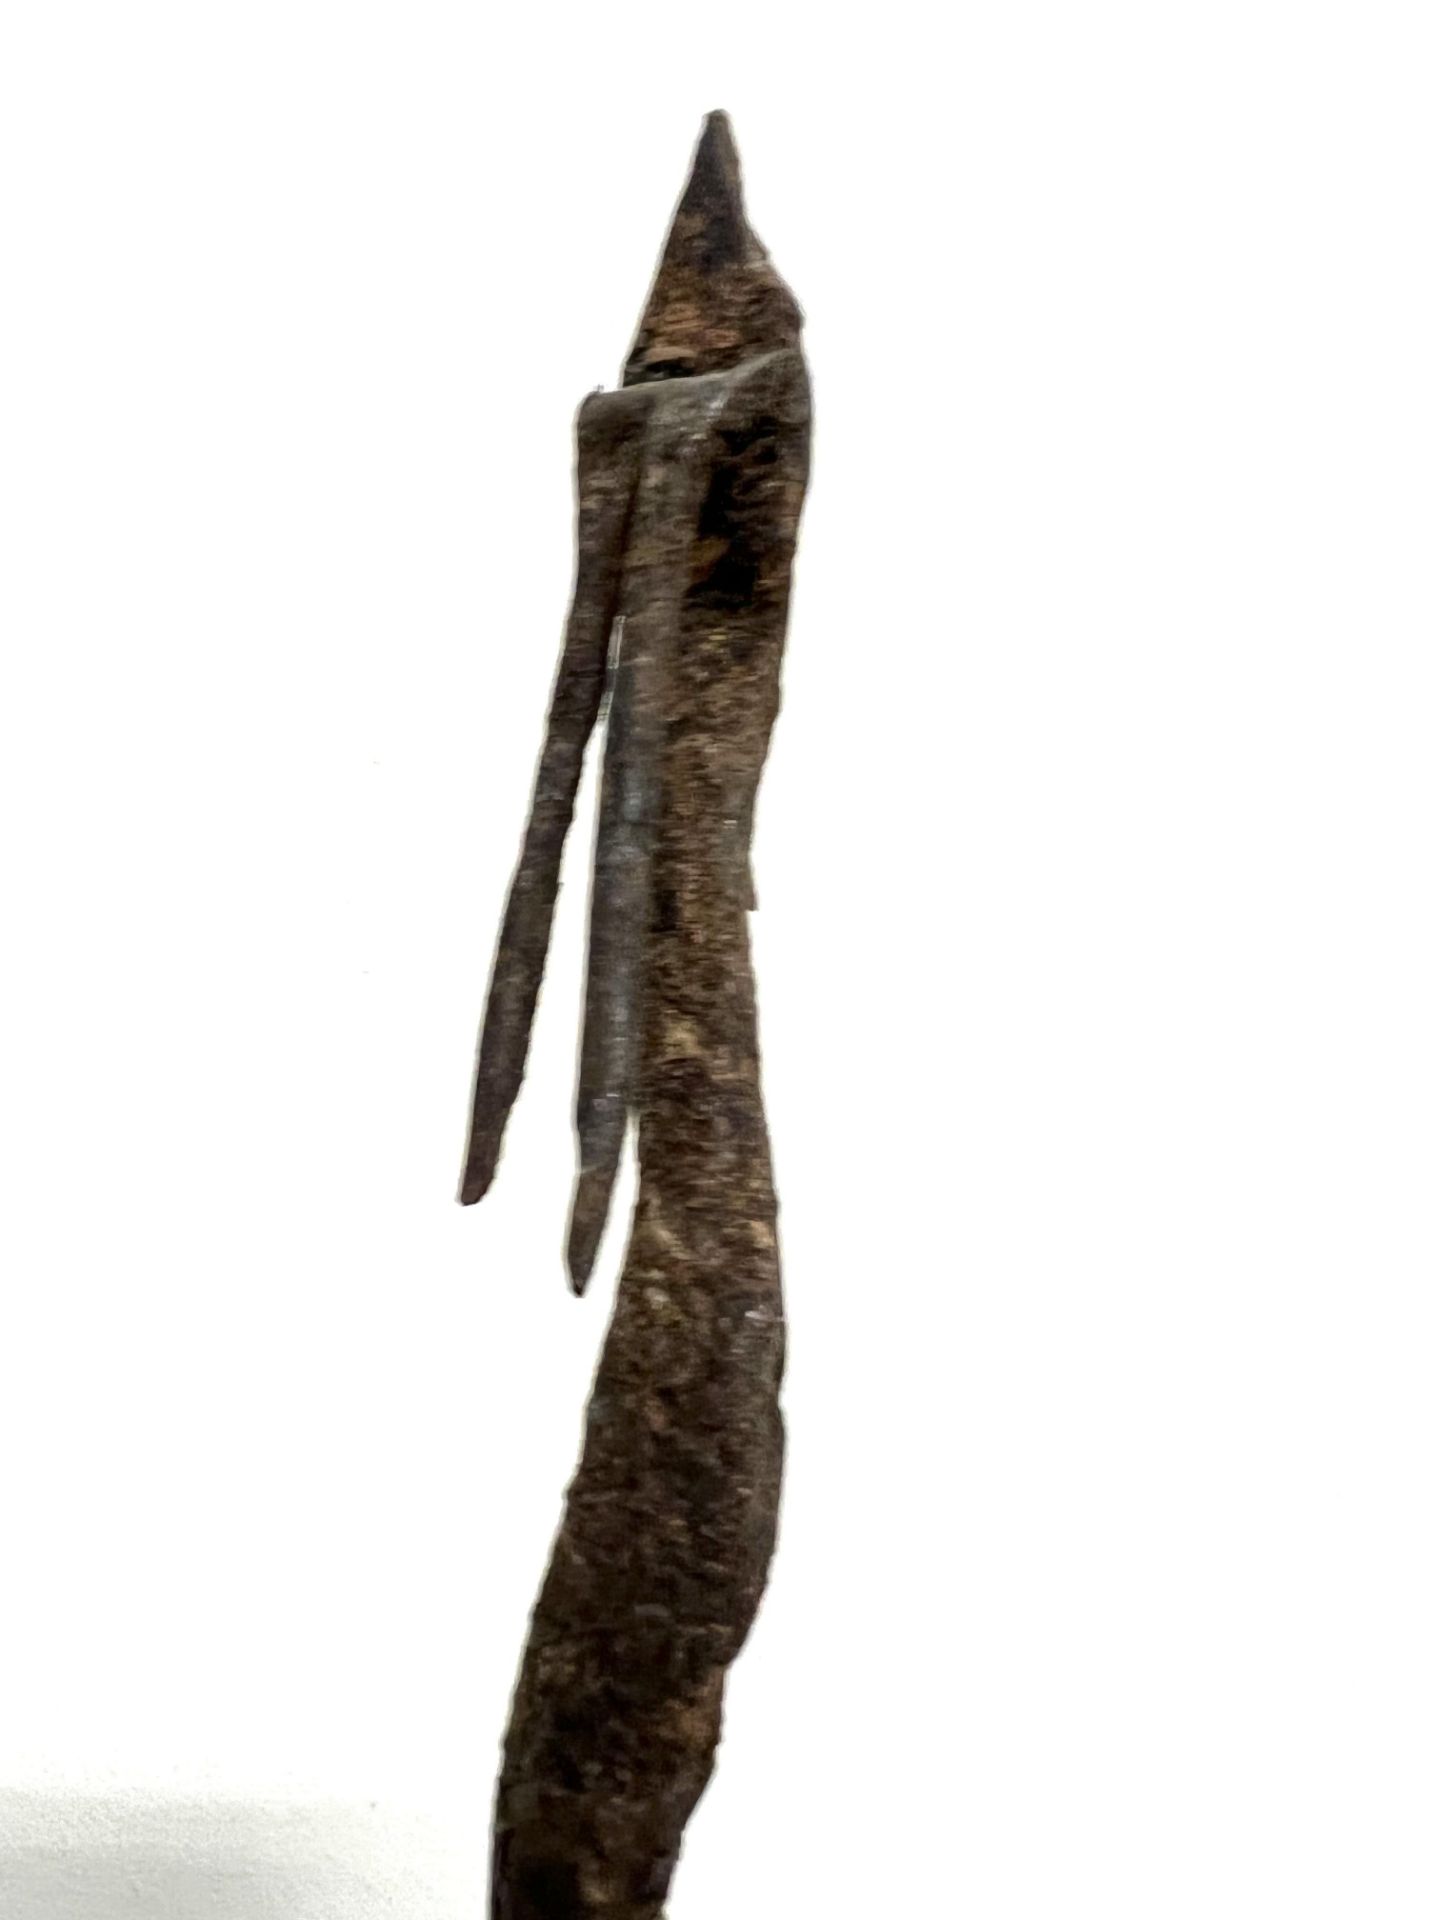 Mali, Dogon, two iron ceremonial stakes in the shape of a snake.